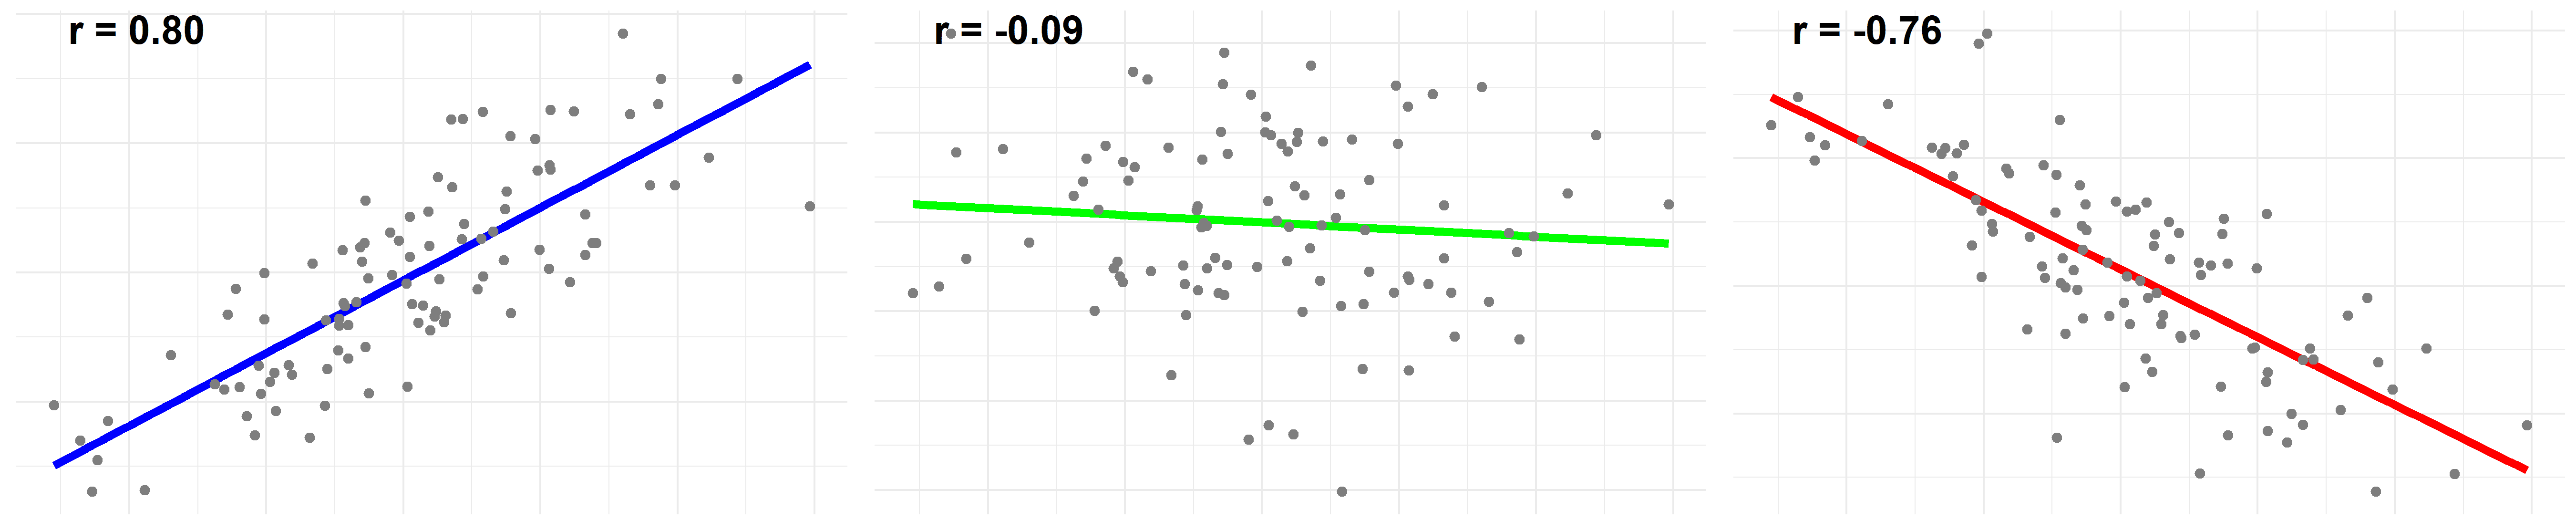 plots with different correlation coefficients